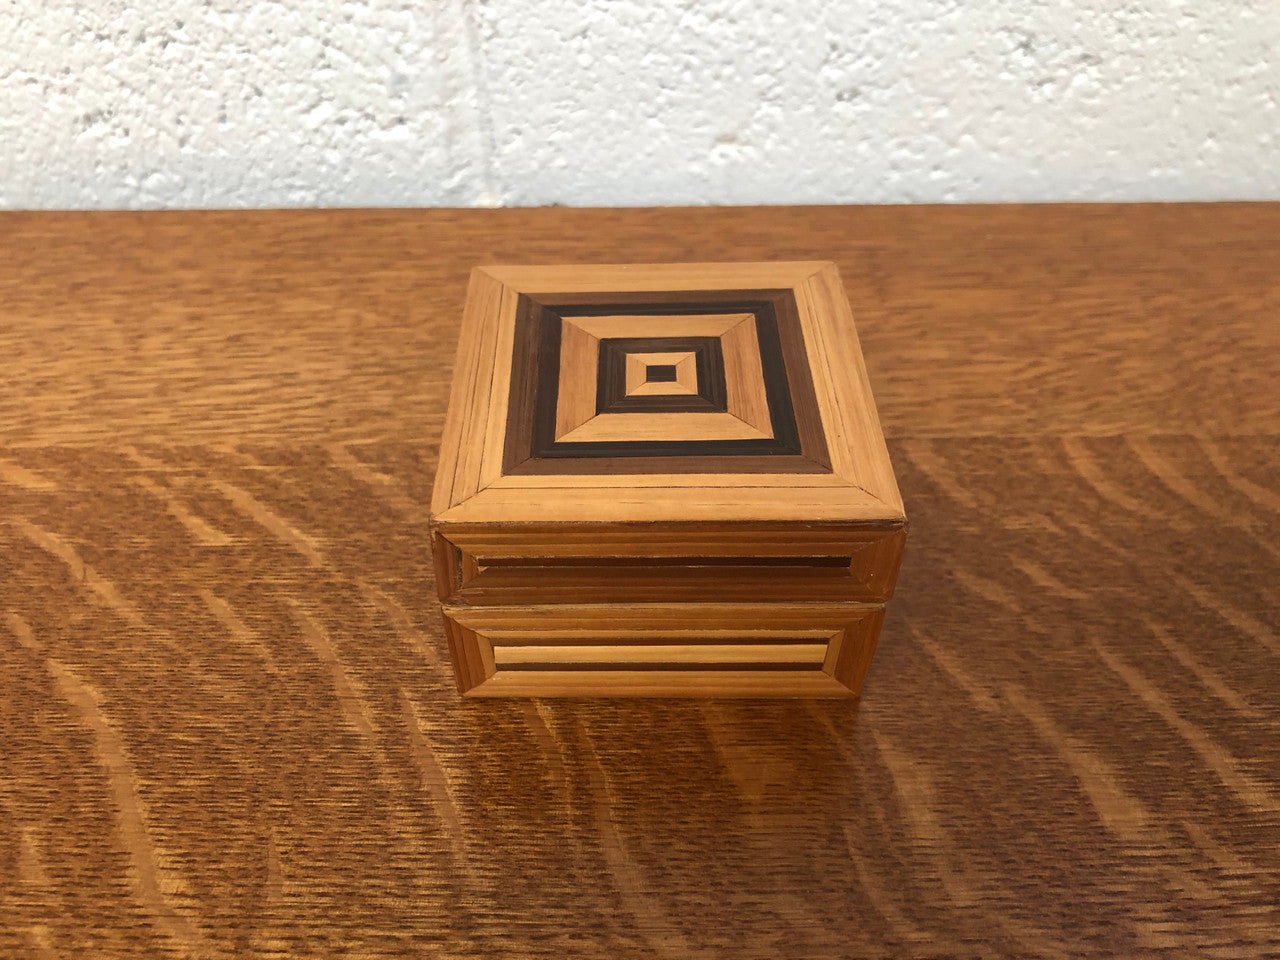 Vintage Square Parquetry Wooden Box